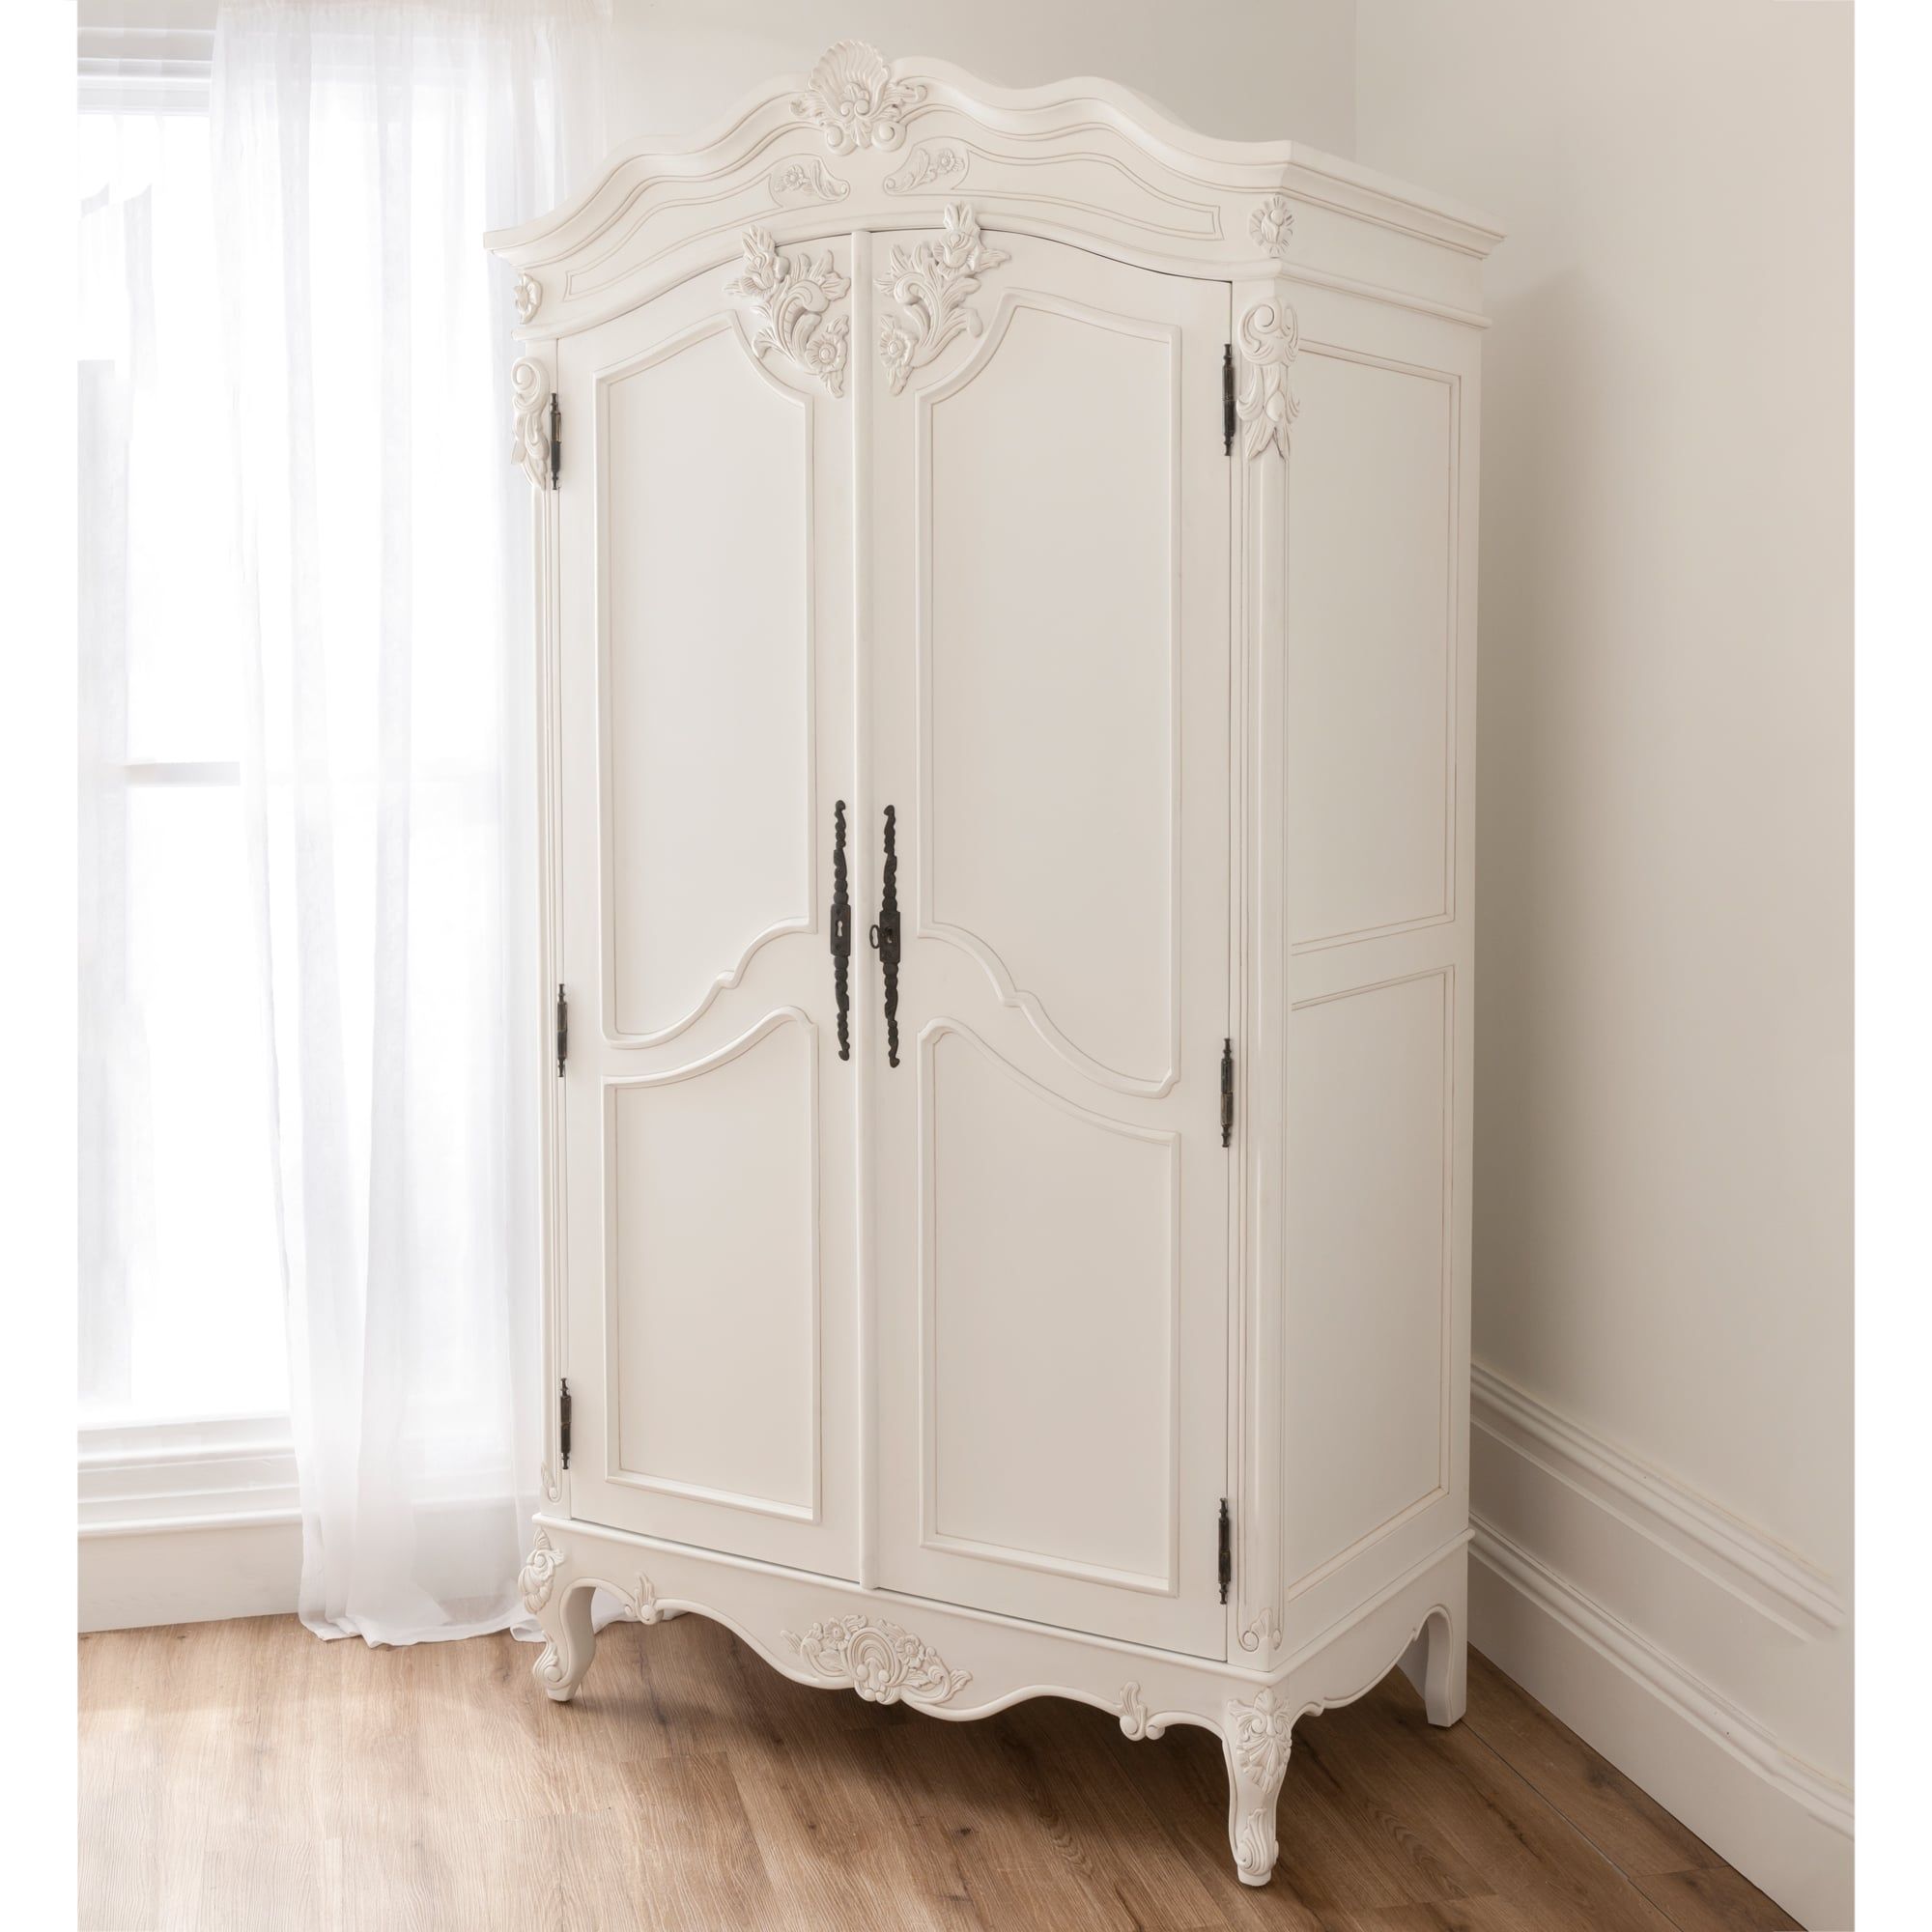 Baroque Antique French Wardrobe Is Available Online At Homesdirect365 Intended For French Style Armoires Wardrobes (View 5 of 15)